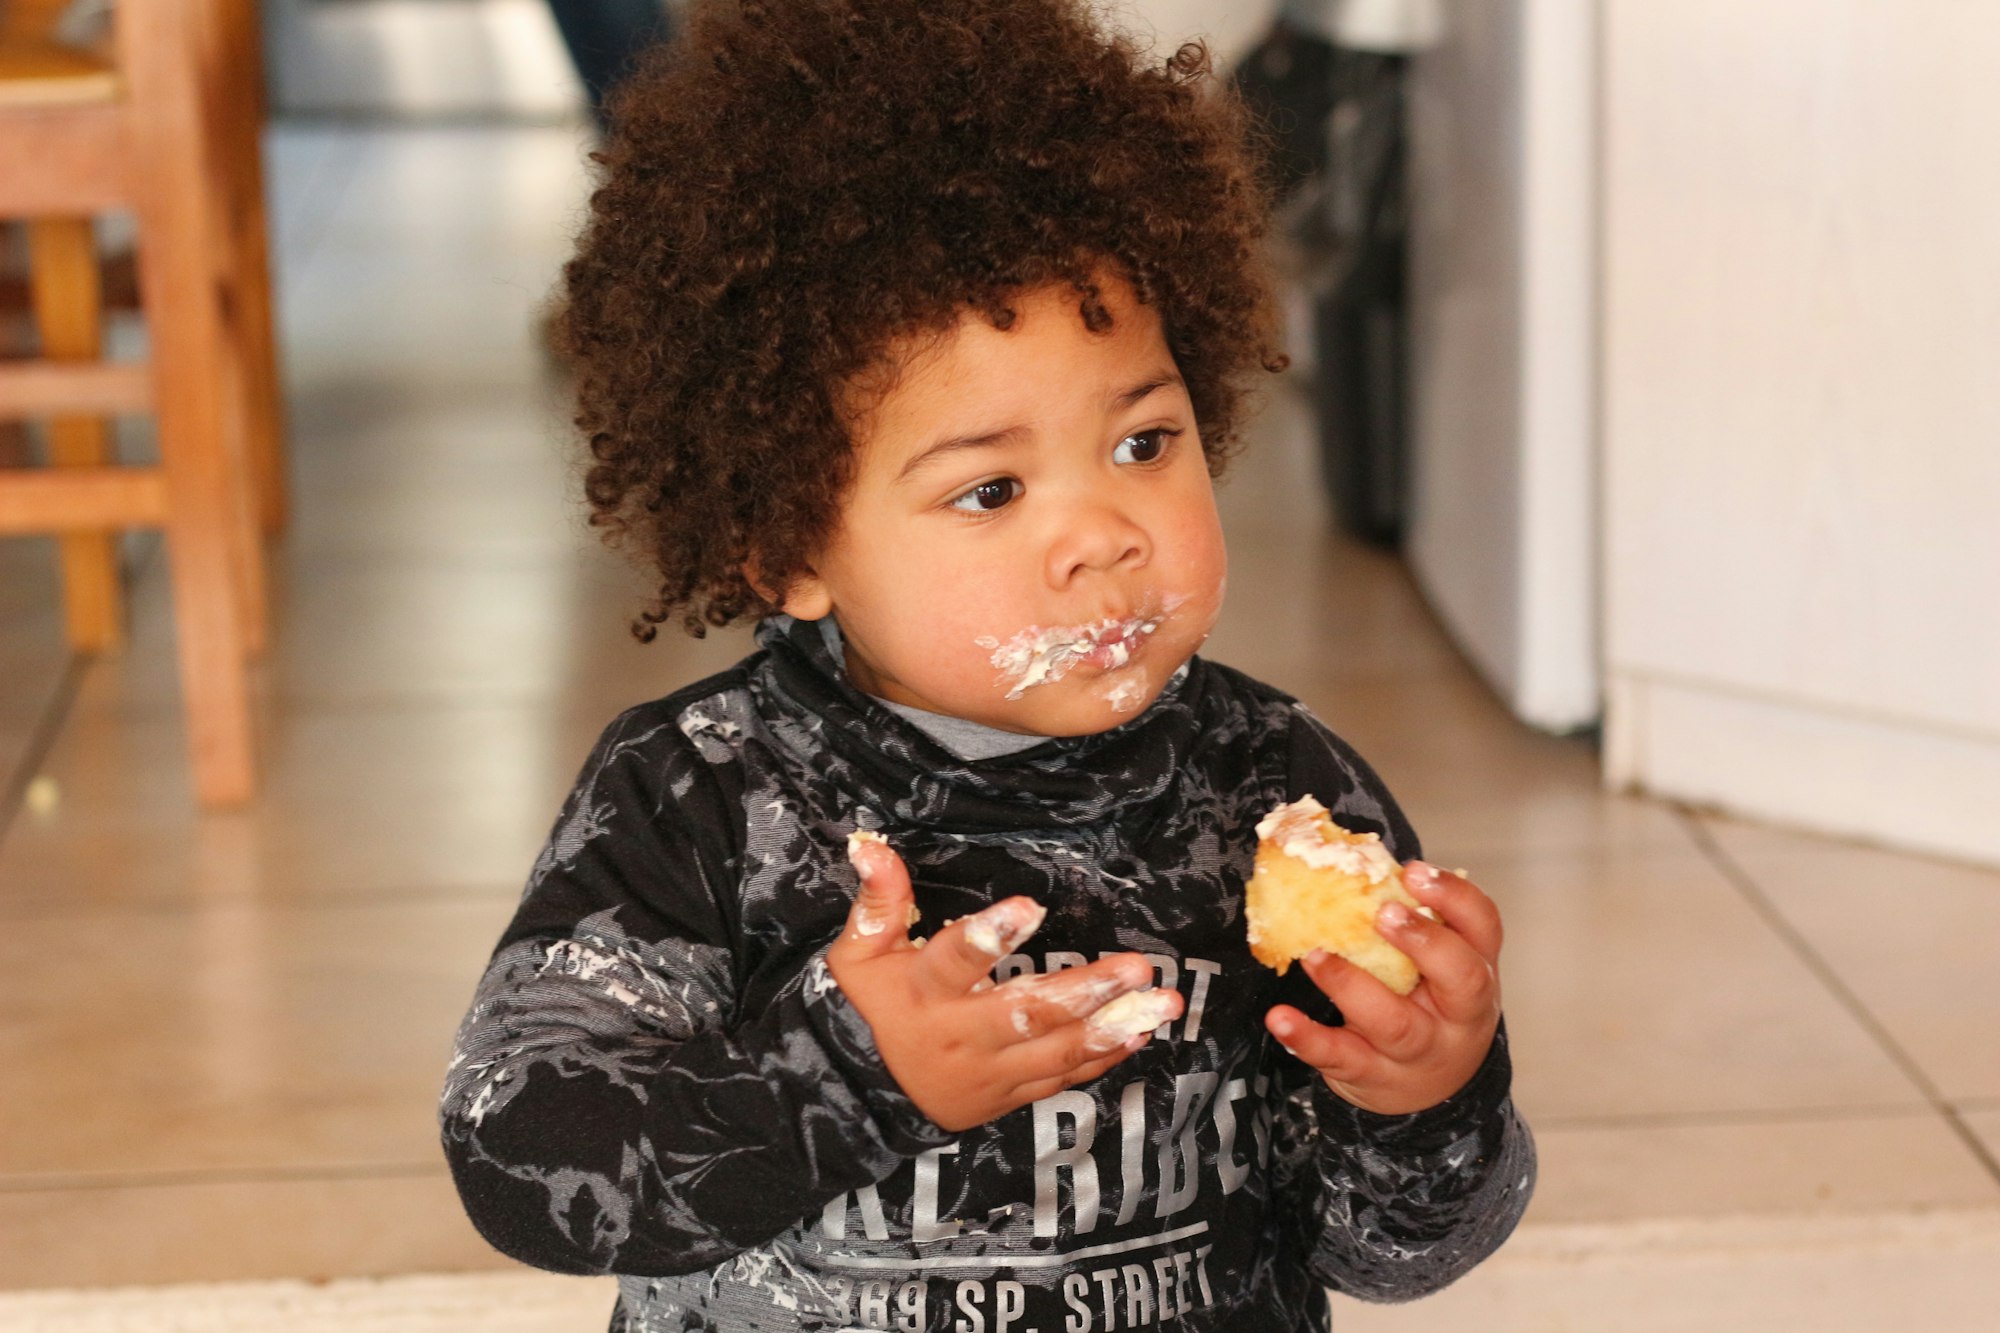 Kid eating ice cream that is broken down by amylase and mechanical digestion, then brought down by peristalsis through the gastrointestinal tract